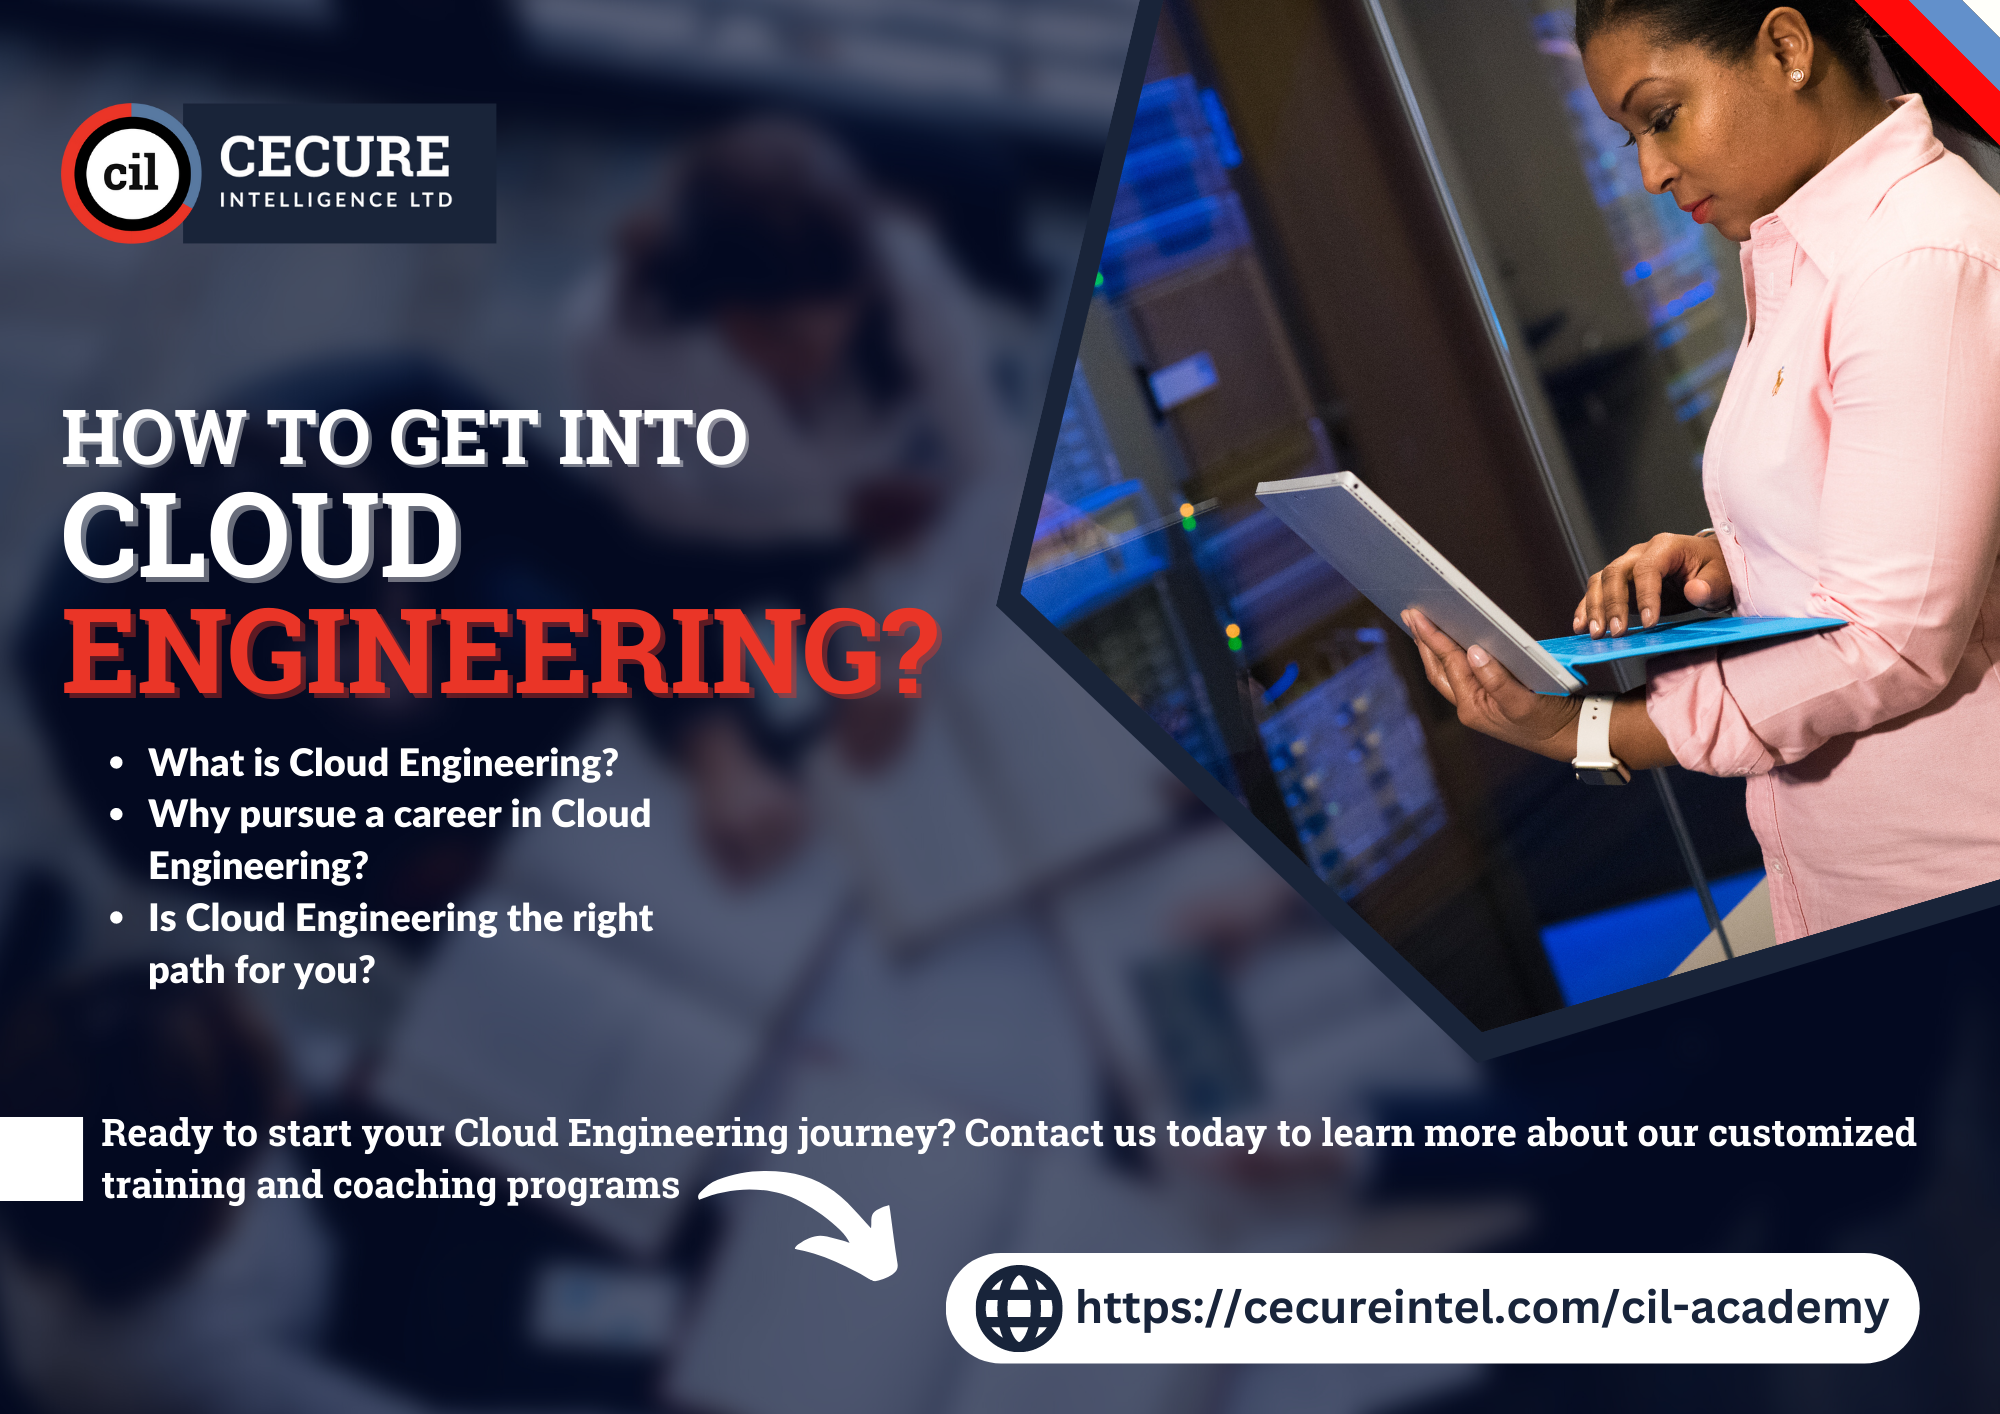 How to get into Cloud Engineering